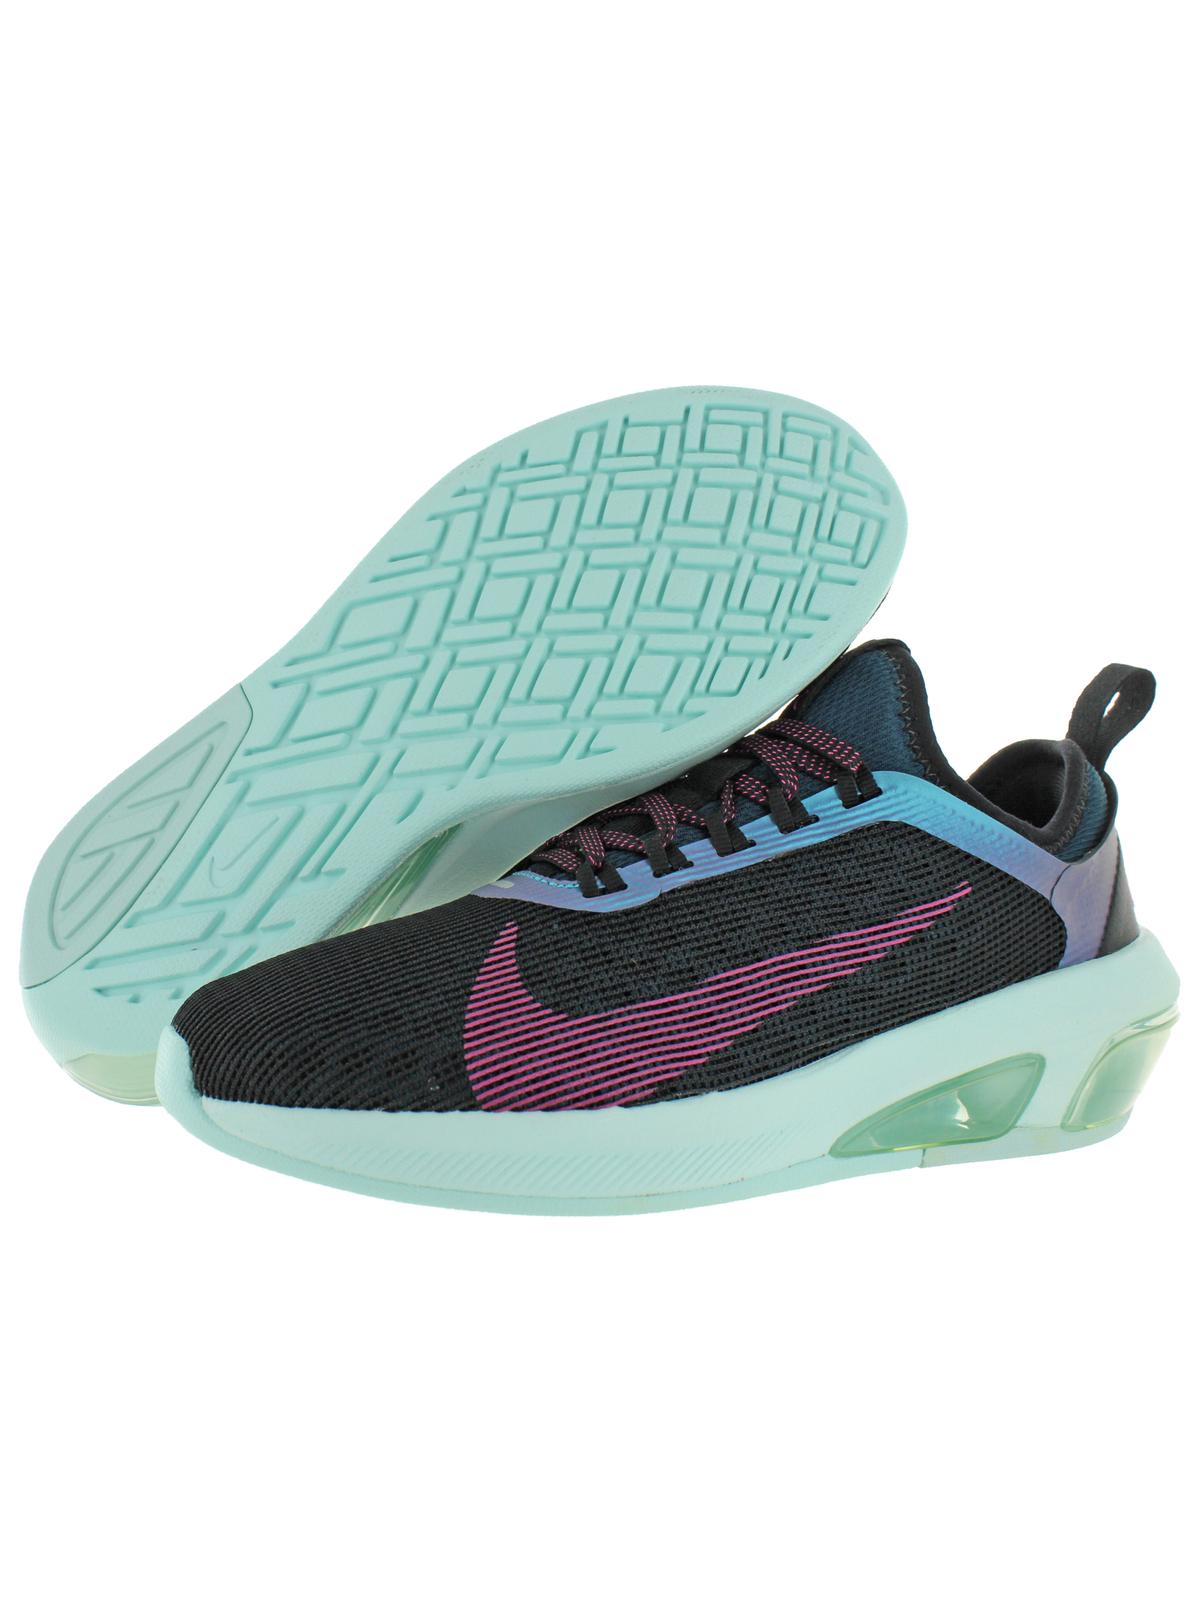 Nike Women's Air Max Fly Black / Laser Fuchsia Teal Tint Ankle-High Running - 6M - image 2 of 2